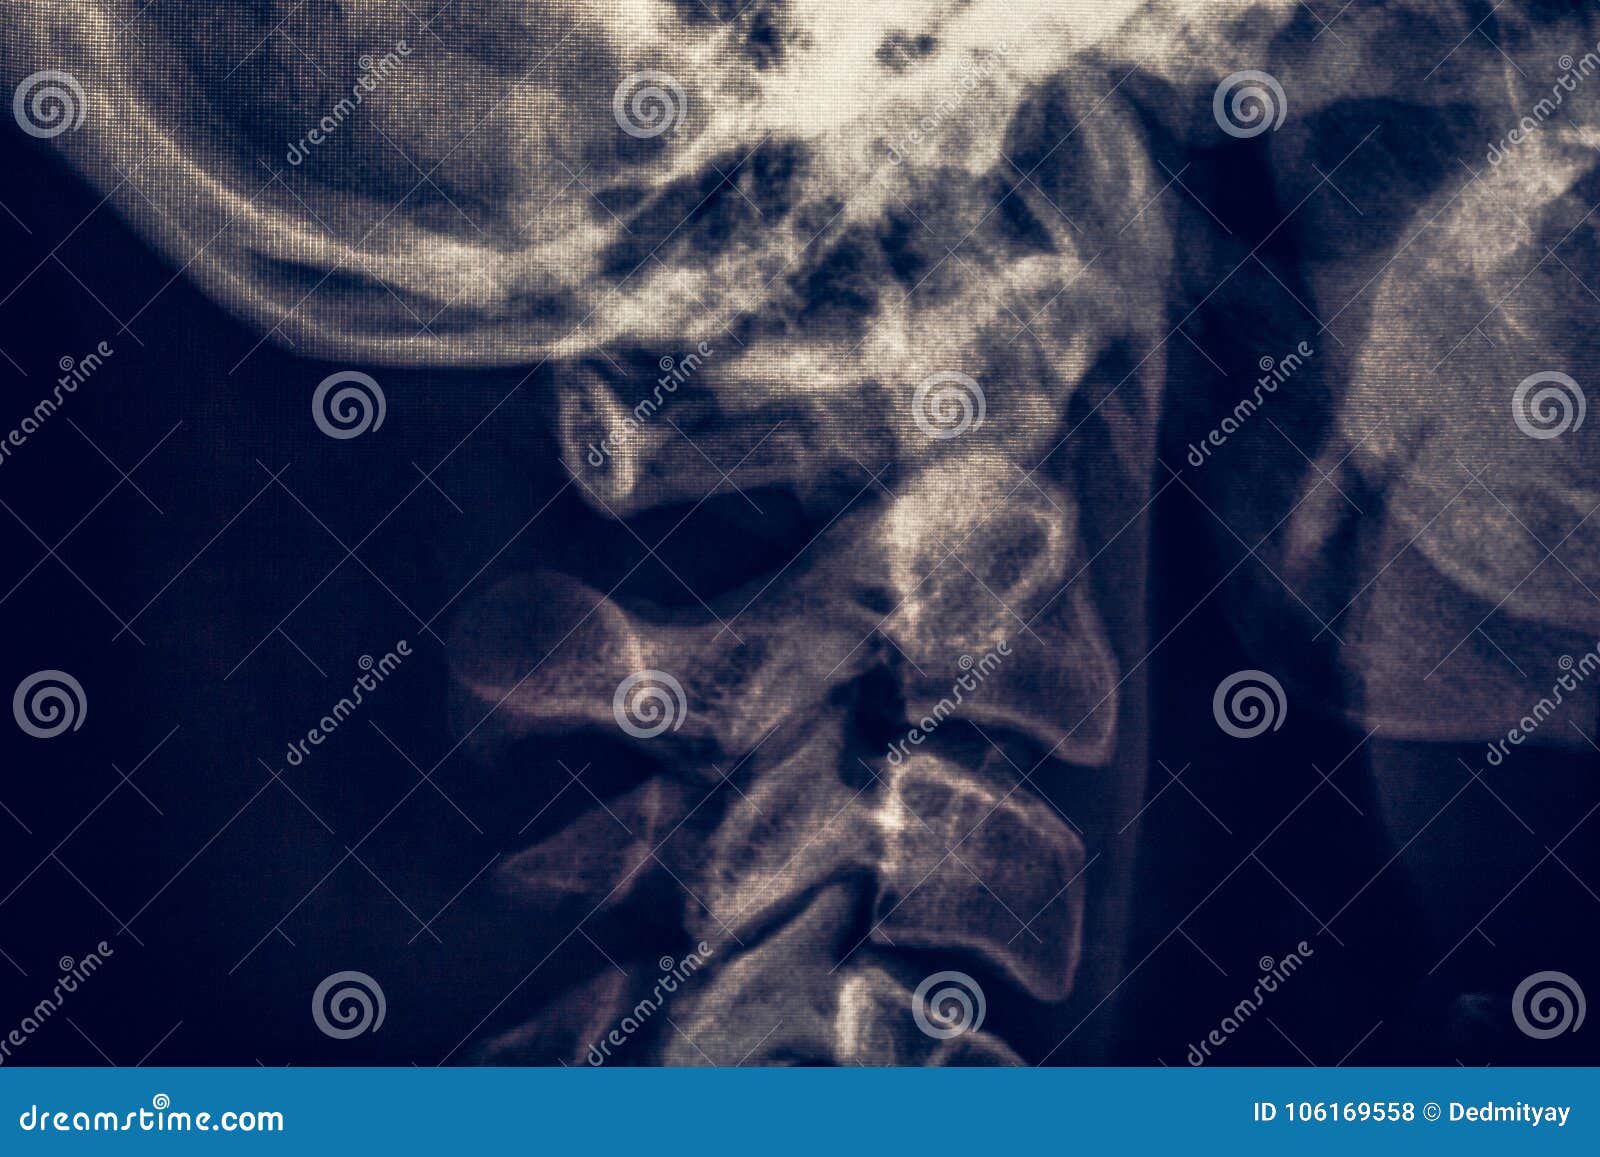 x-ray radiography or roentgen of human neck, medical radiology concept